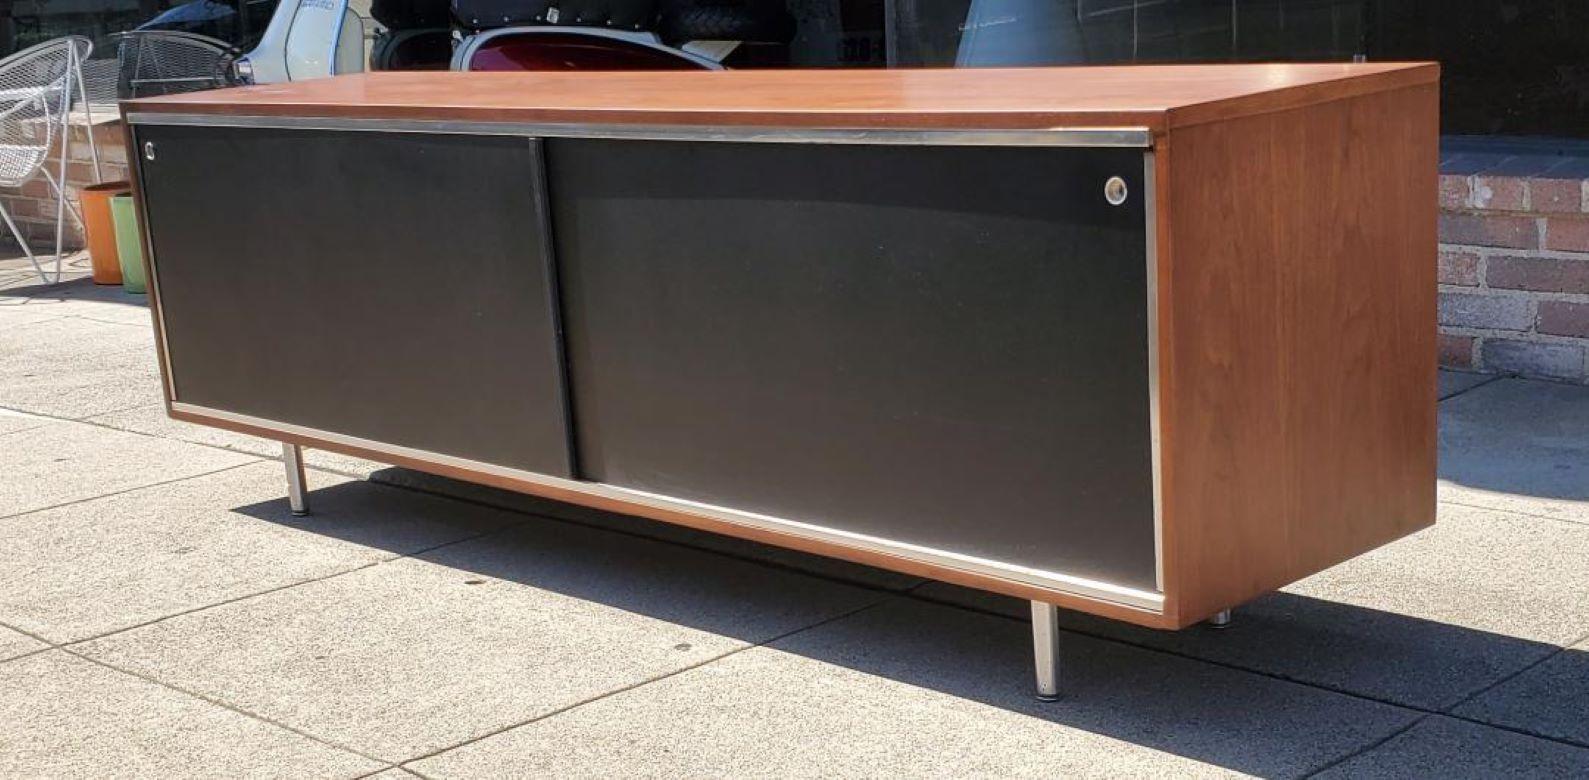 Rare Vintage Walnut credenza In The Manner Of A Herman Miller George Nelson Executive Credenza / Sideboard / Cabinet.

In Such As A 1950s Herman Miller Walnut Executive Office Credenza, We Have Taken Many Photos So You Can See The Beautiful Walnut